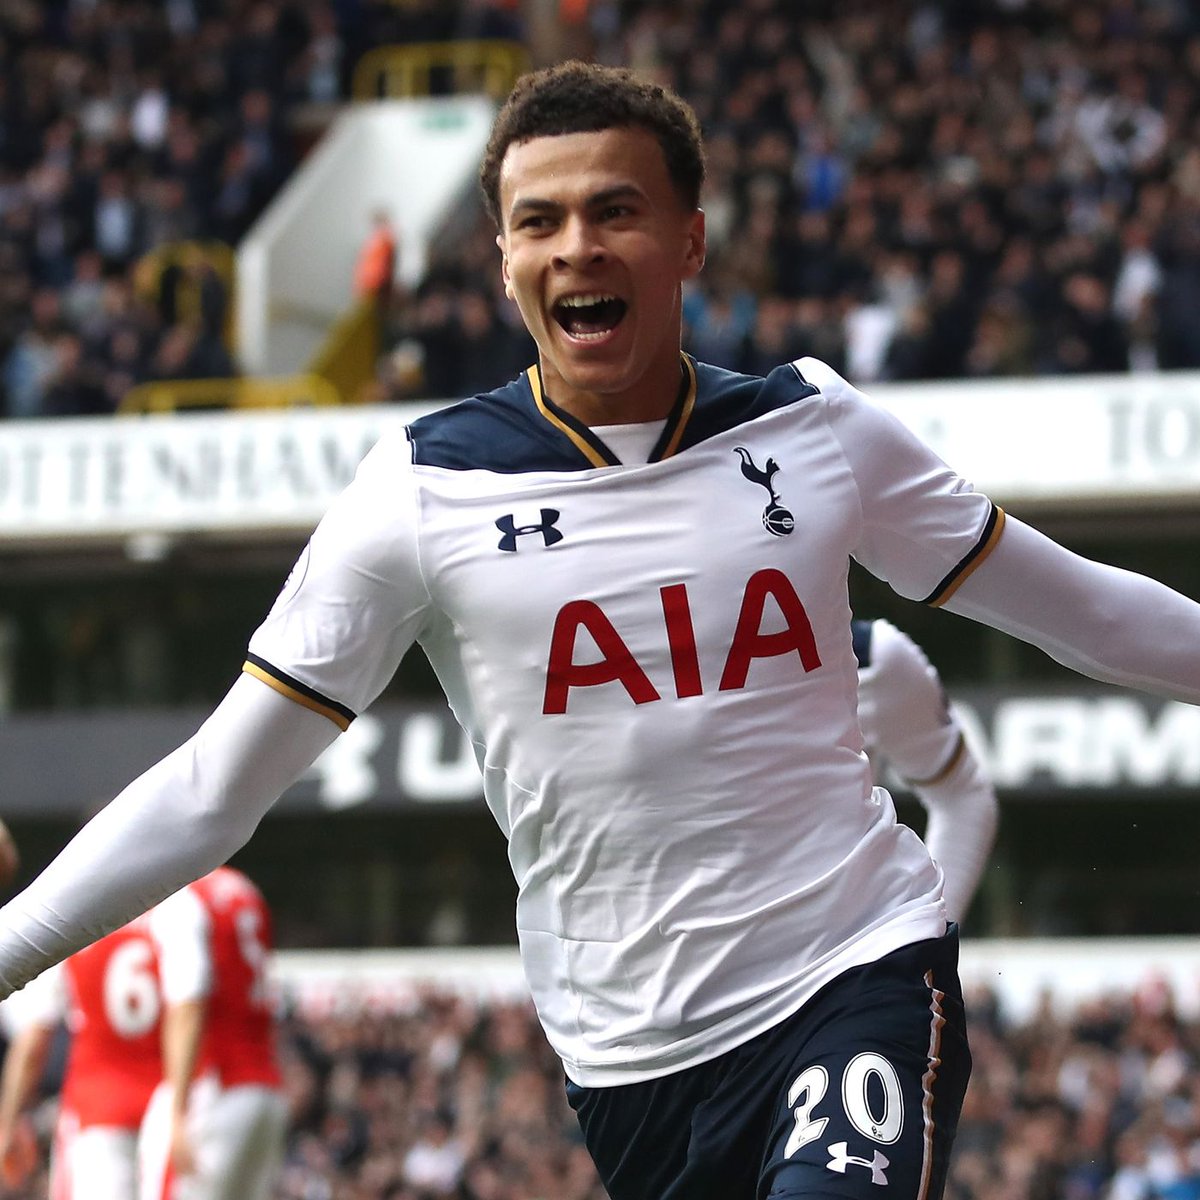 Happy 28th birthday to former Spurs star Dele Alli 🎂 A Tottenham player between 2015 and 2022: • Premier League: 181 appearances, 51 goals • FA Cup: 24 appearances, 4 goals • League Cup: 12 appearances, 4 goals • Europe: 52 appearances, 8 goals #COYS #THFC